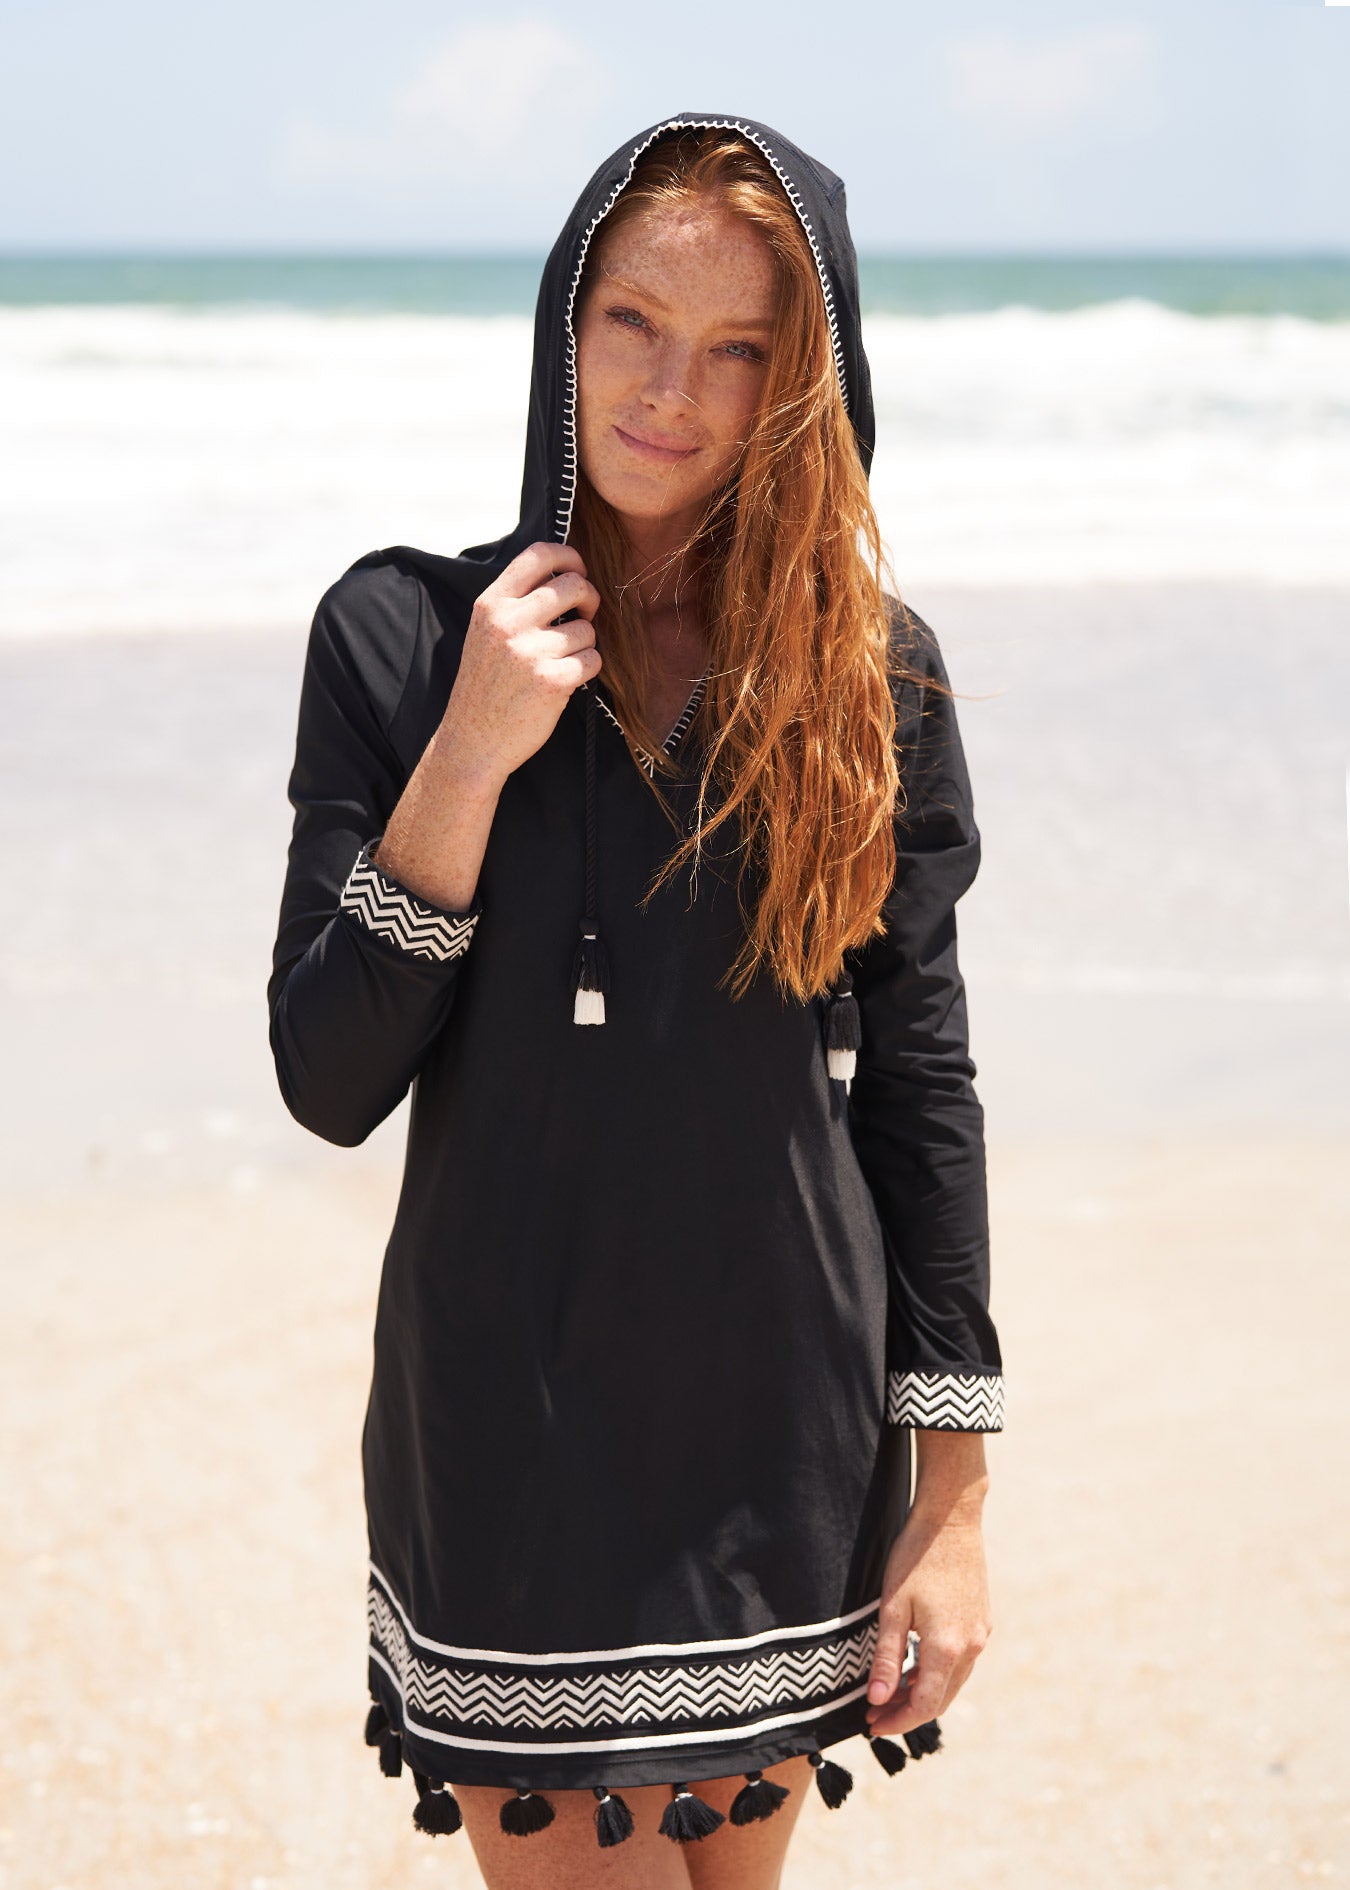 woman on the beach wearing Sanibel Hooded Cover Up.